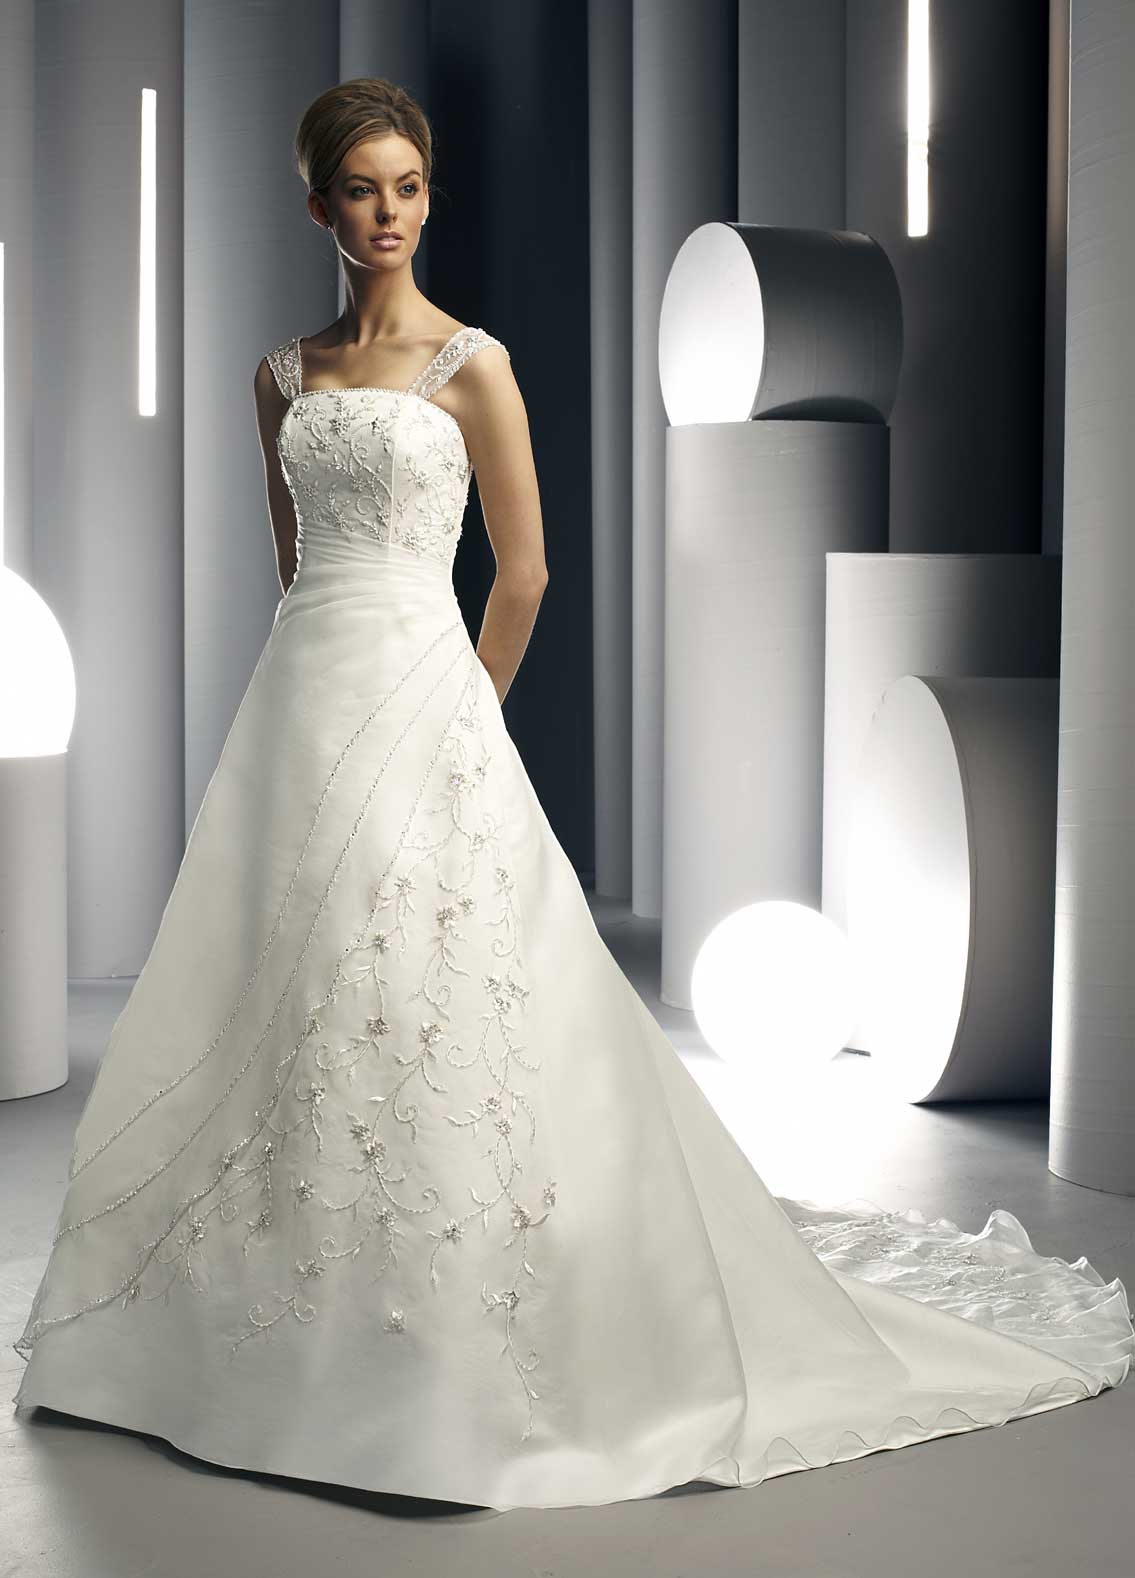 Organza wedding gown with lace shoulder straps 